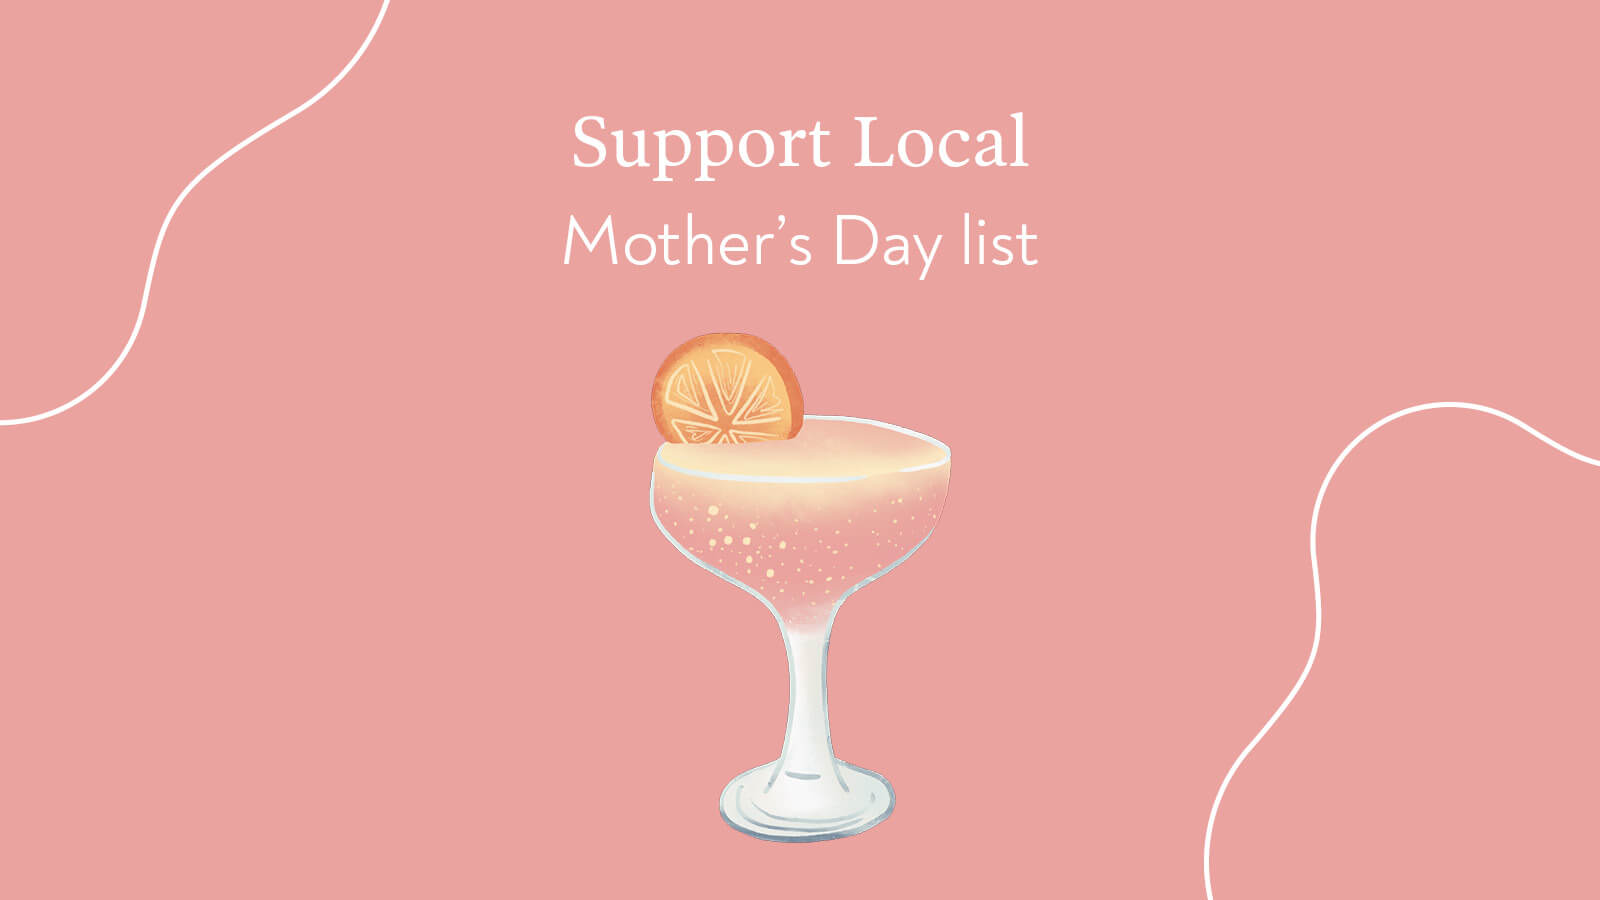 Mother's Day Gift ideas from local suppliers